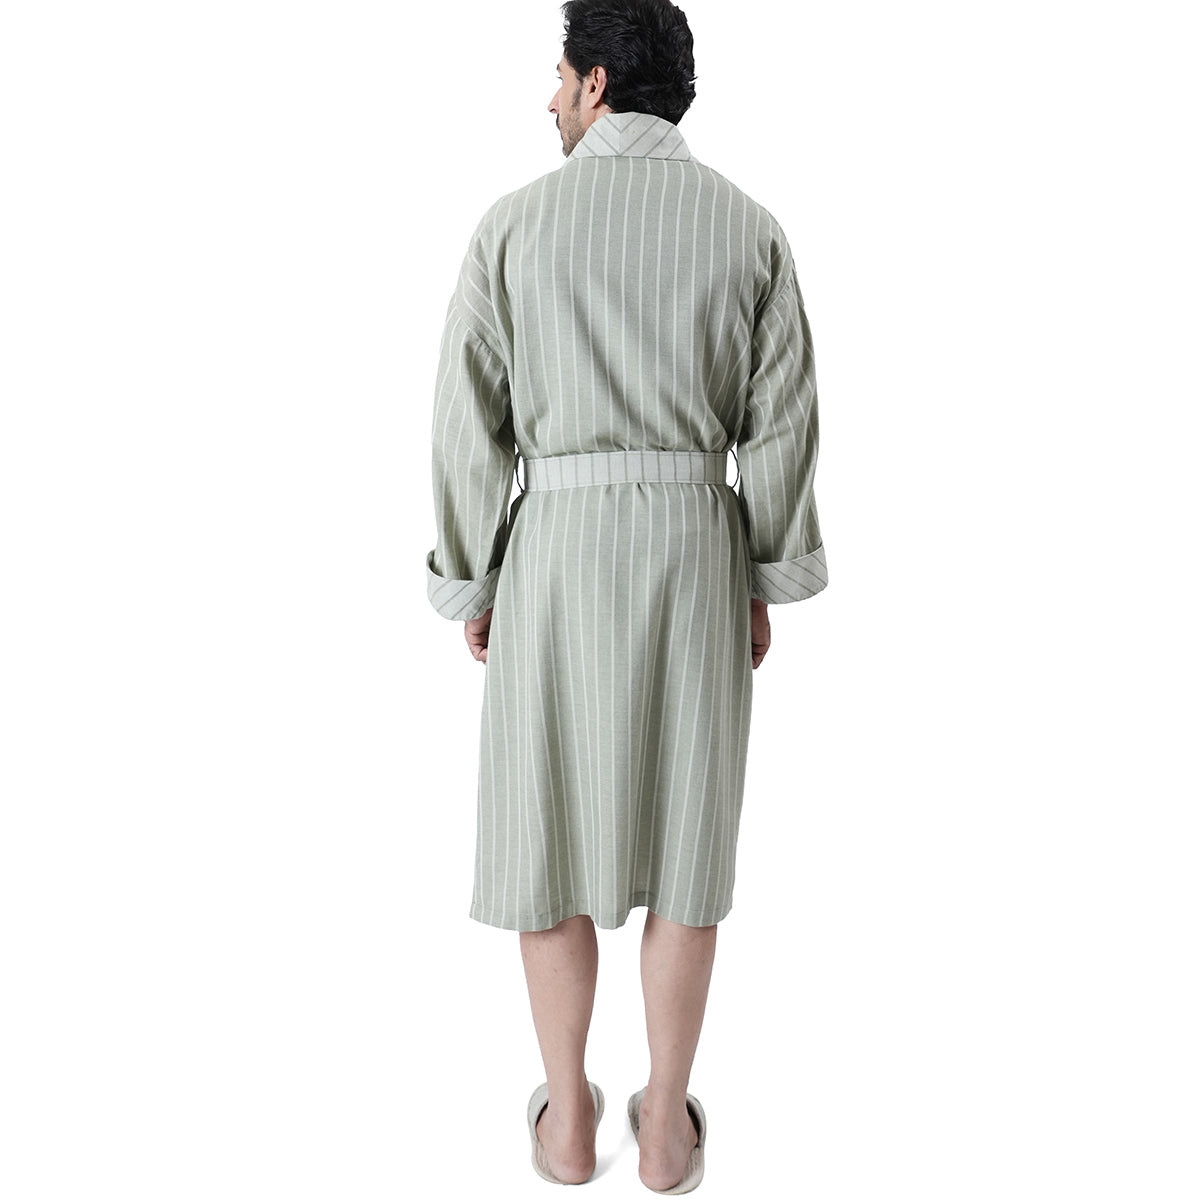 Luxe Boutique Adore stripe Cashmere Soft 1Pc Calf Length Robe/ Gown / Bath Robe In Box Packaging